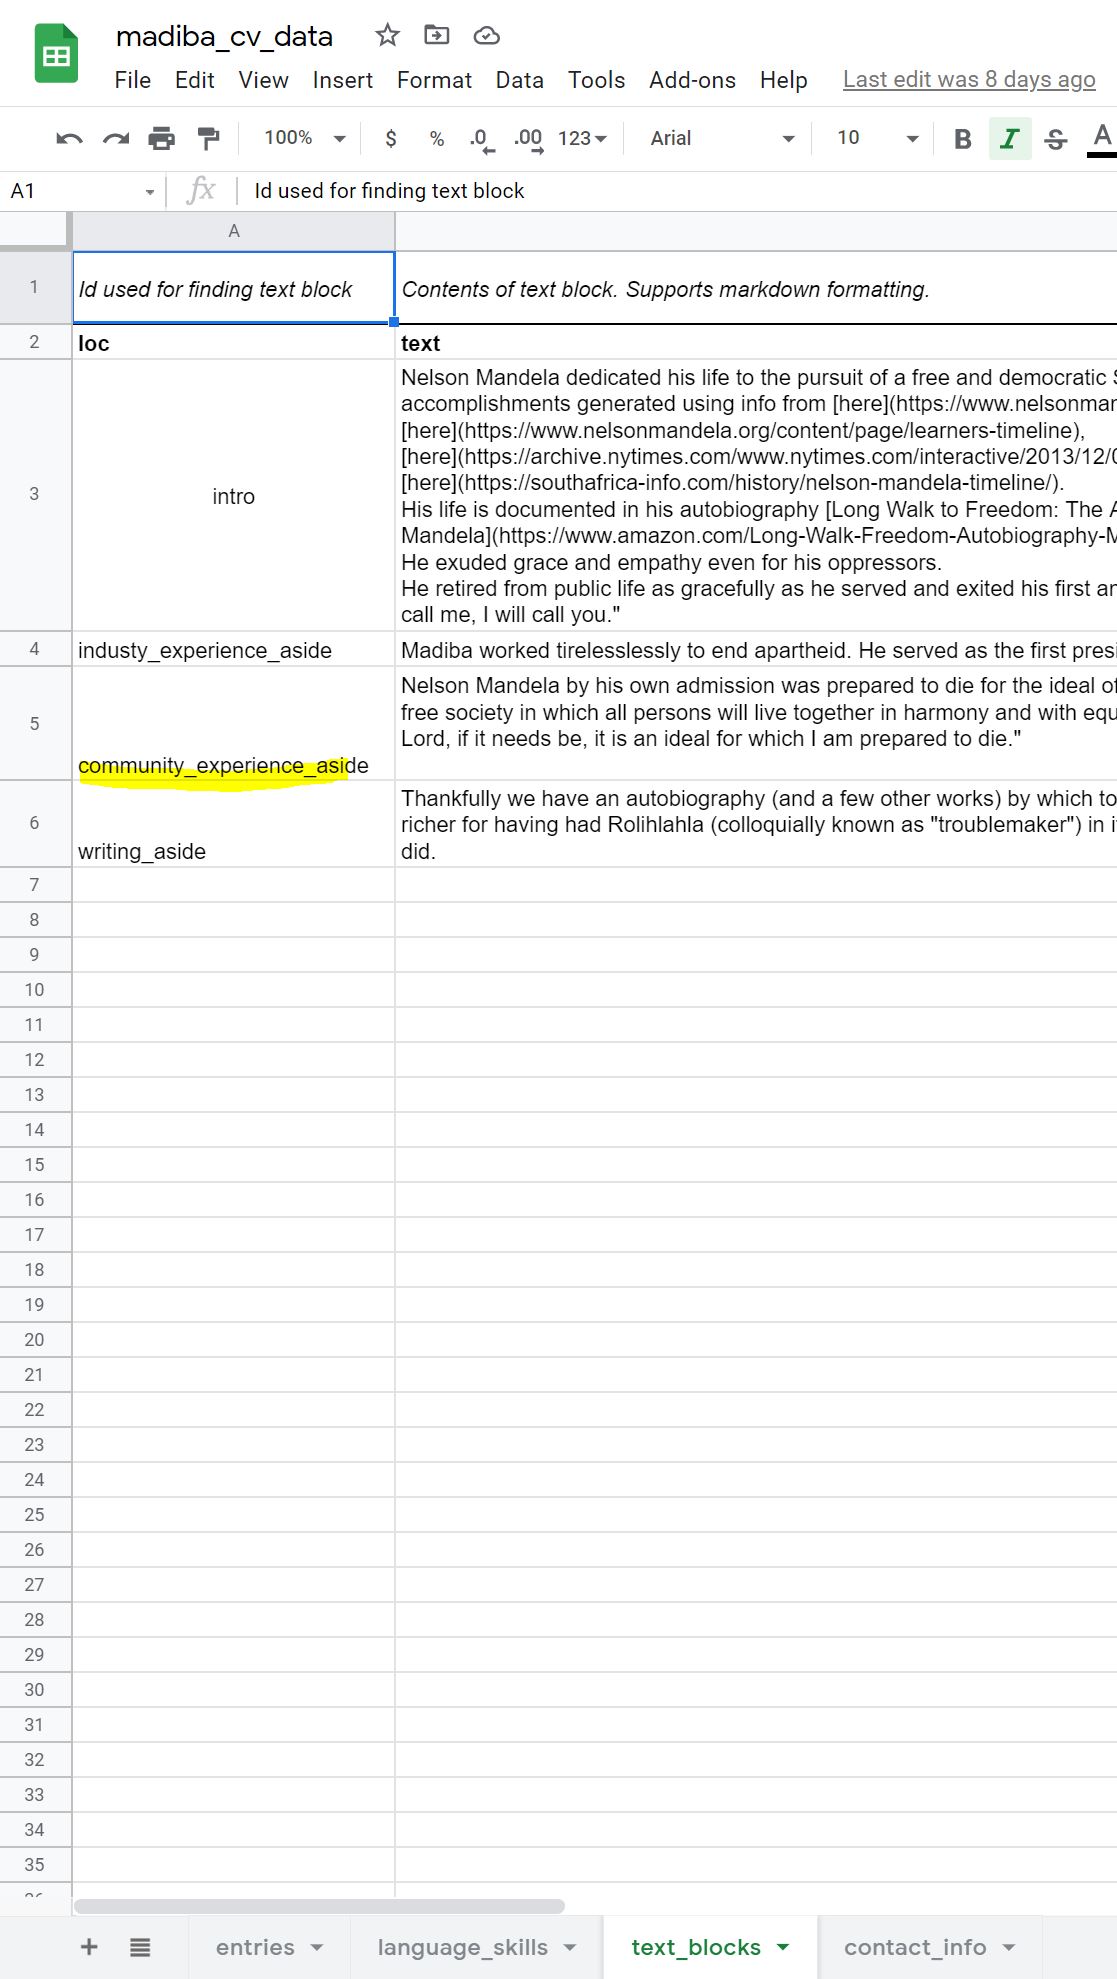 my text_blocks sheet of the Google Sheets is shown with the community_experience_aside highlighted